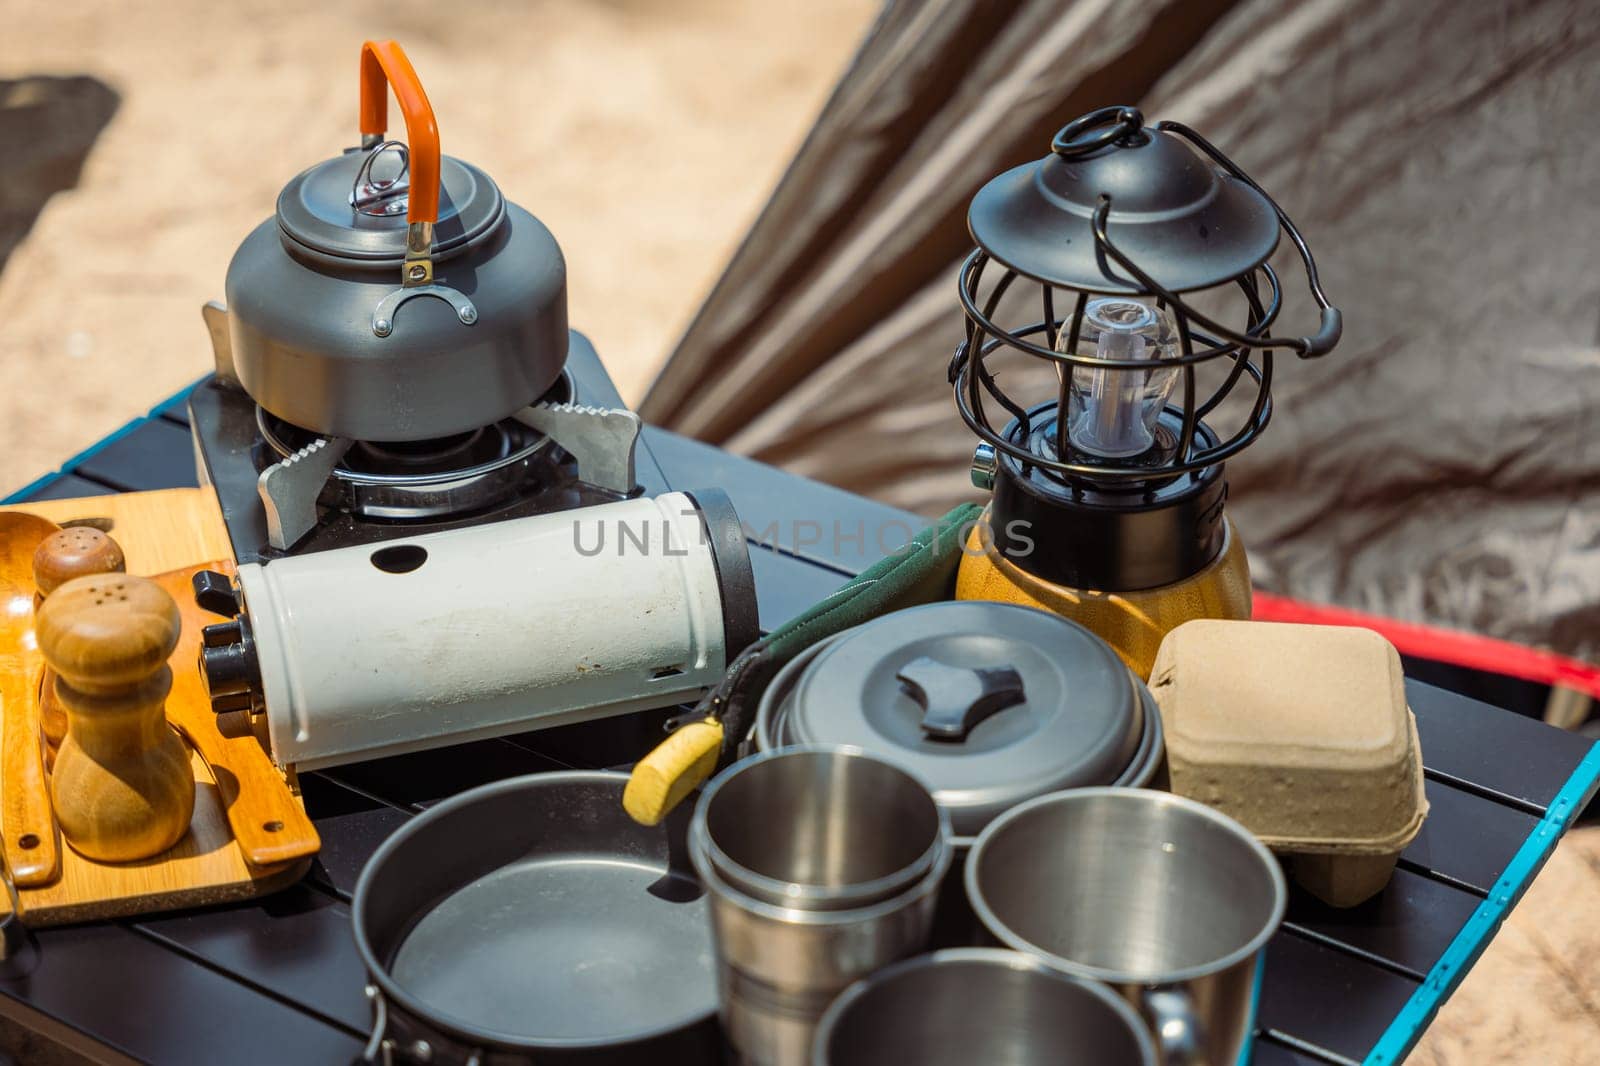 Camping essentials neatly arranged at a beachfront tent, kettle, pot, pan, gas stove, flashlight, and camera. Perfect setup for a relaxing outdoor journey in nature. by Sorapop